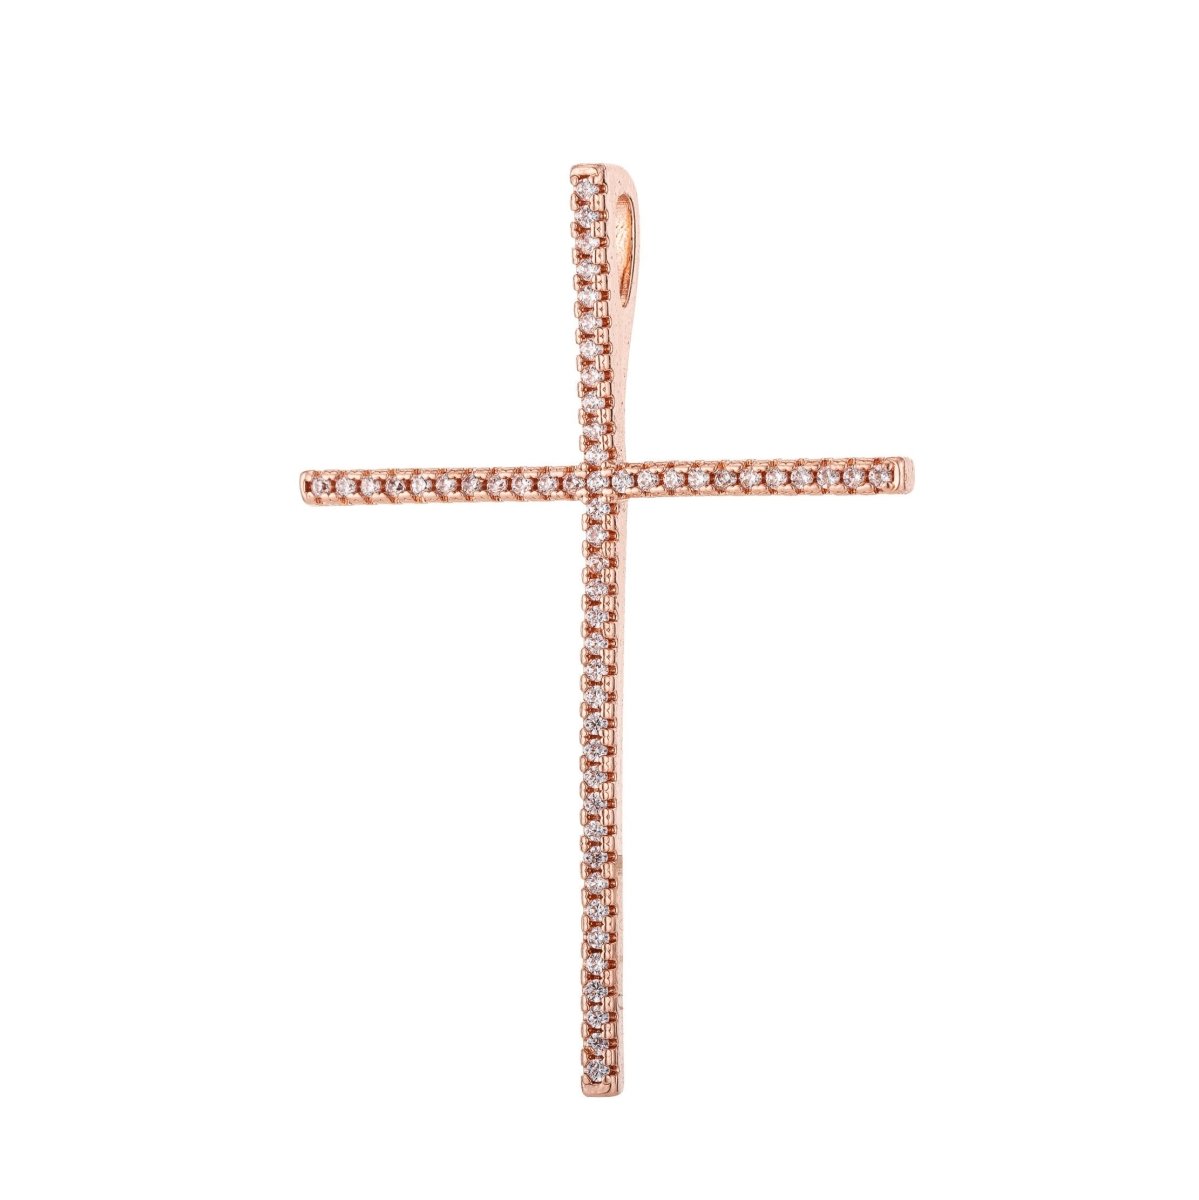 On Sale! CLEARANCE! Gold Cross, Christian Catholic Symbol, Religion, Faith, Joy, Cubic Zirconia Necklace Pendant Charm Bail Findings For Jewelry Making | C-227 - DLUXCA